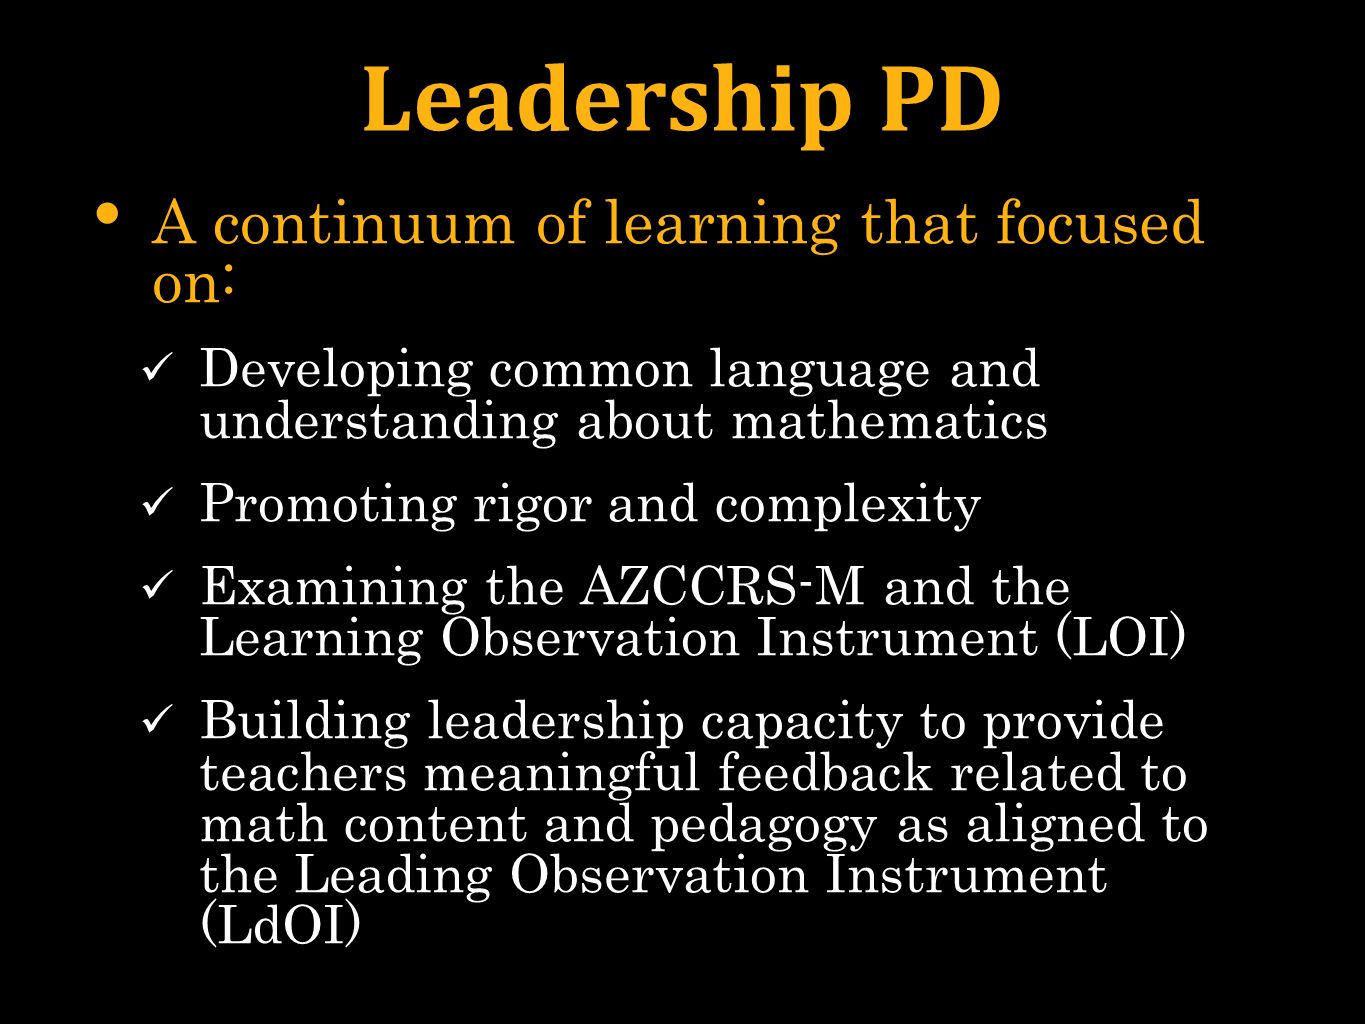 Leadership PD A continuum of learning that focused on: Developing common language and understanding about mathematics Promoting rigor and complexity Examining the AZCCRS-M and the Learning Observation Instrument (LOI) Building leadership capacity to provide teachers meaningful feedback related to math content and pedagogy as aligned to the Leading Observation Instrument (LdOI)